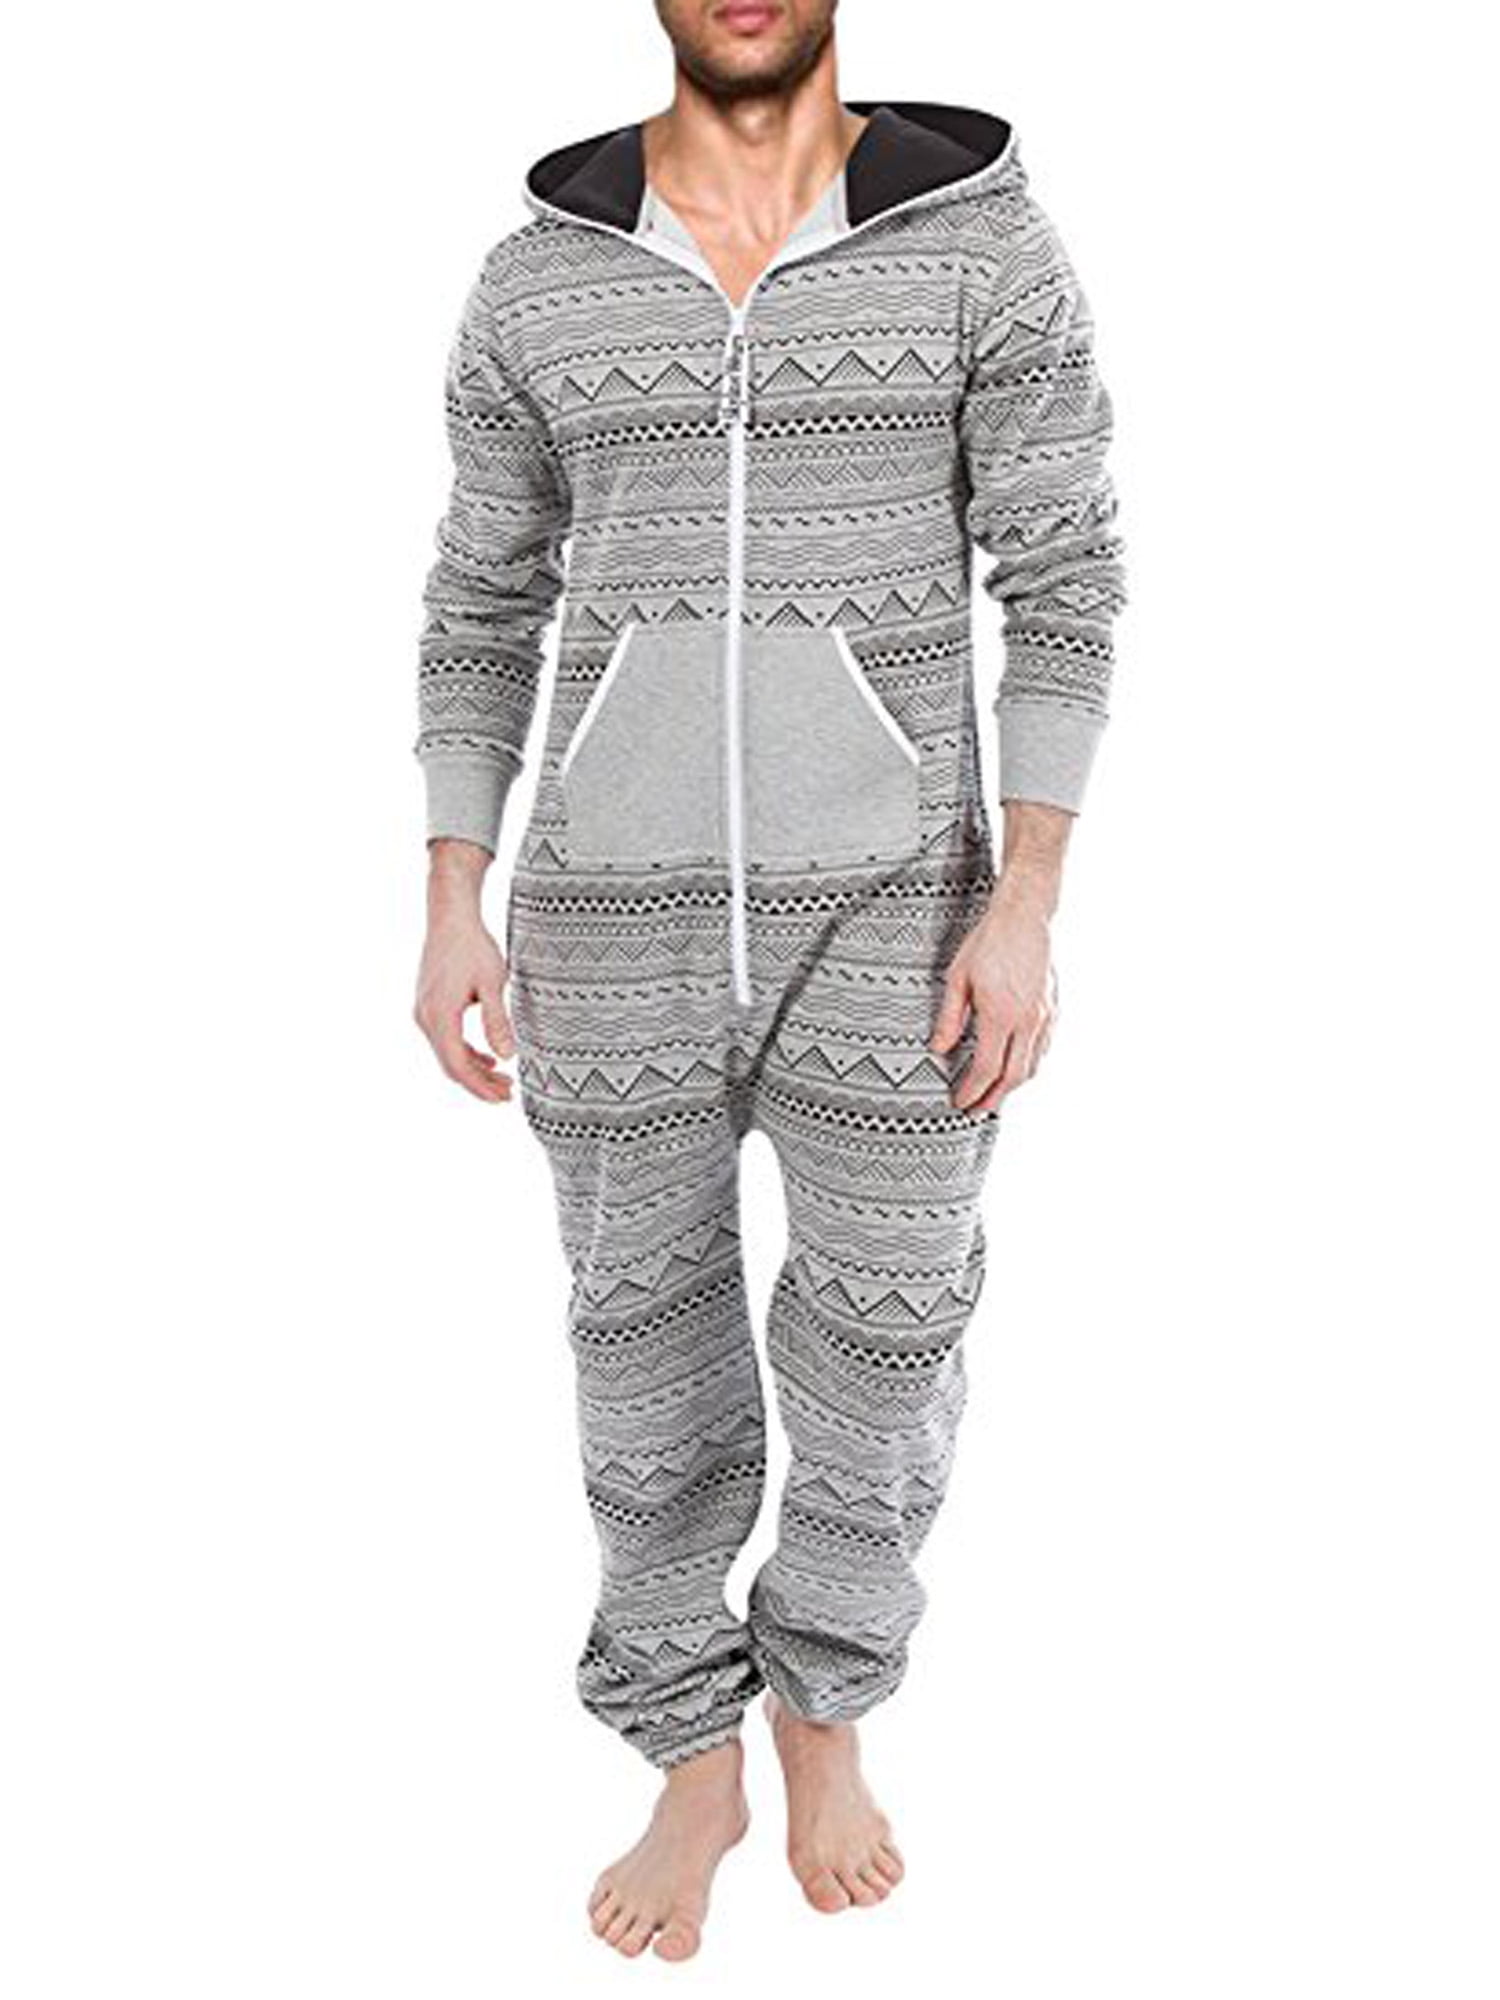 Men's Adult Non-Footed Jumpsuit one-Piece Pajama Zipper Hoodie Playsuit 